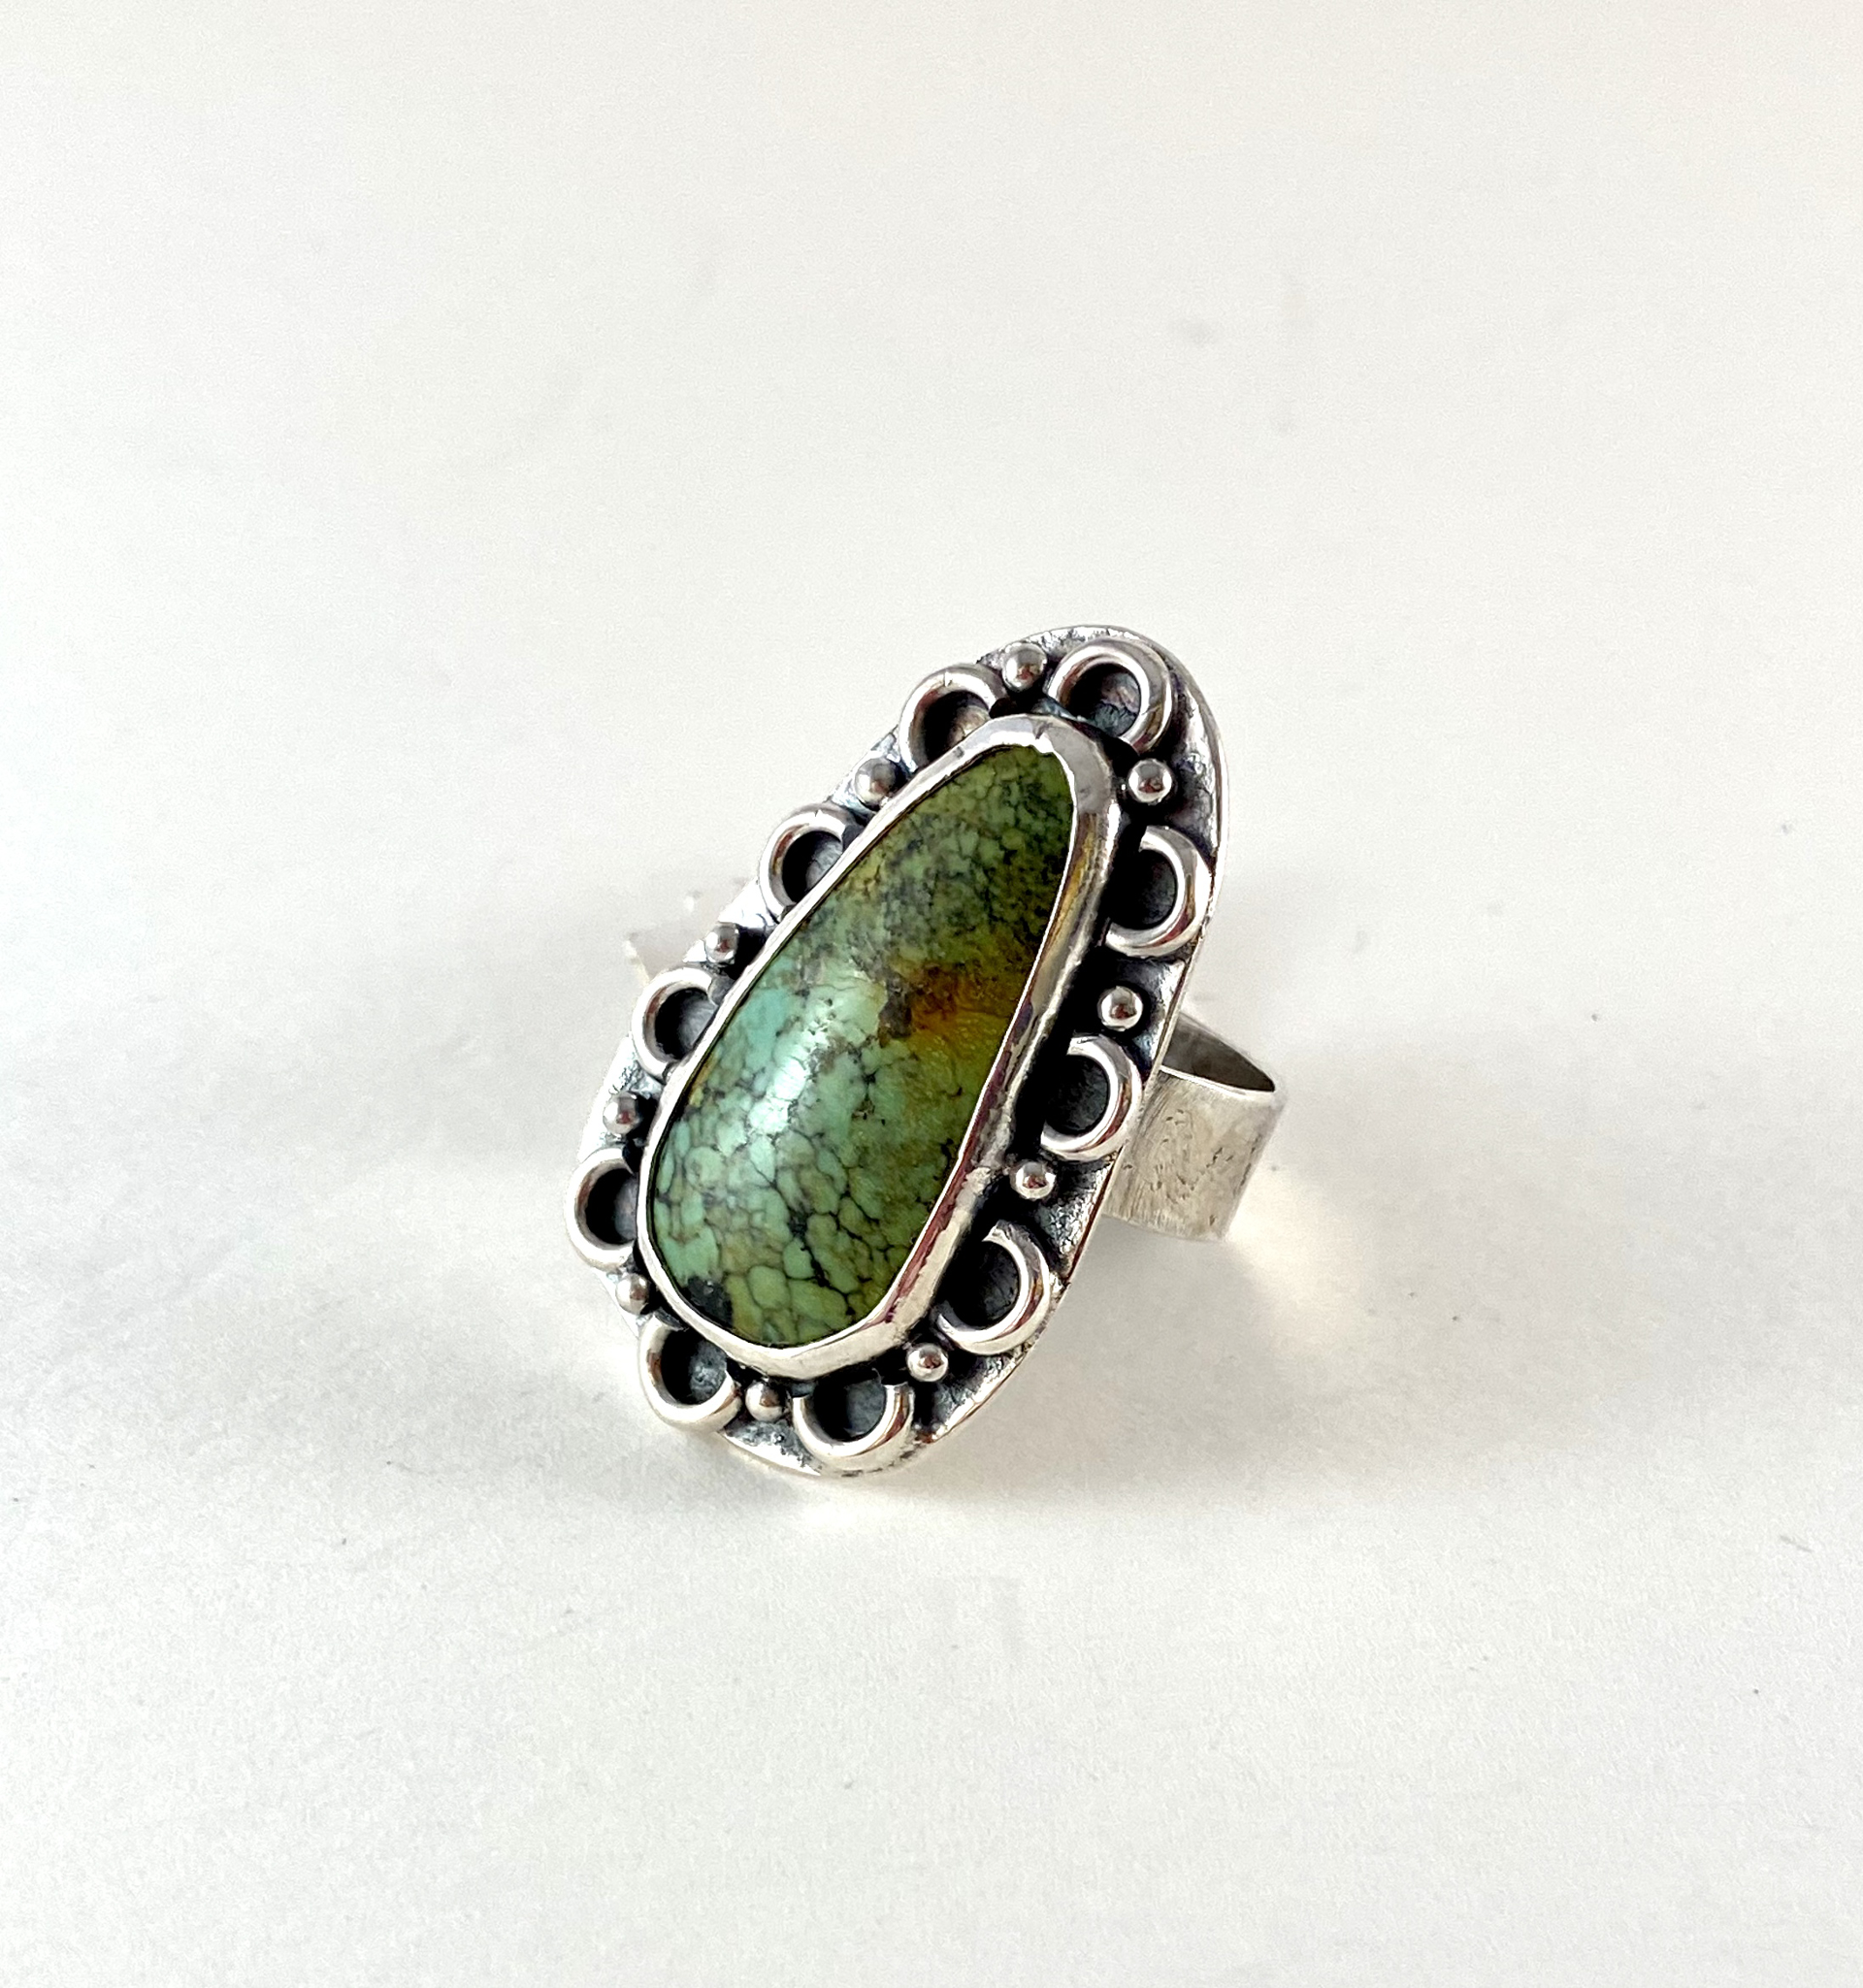 Silver and Turquoise Ring, sz 7.5 by Anne Bivens